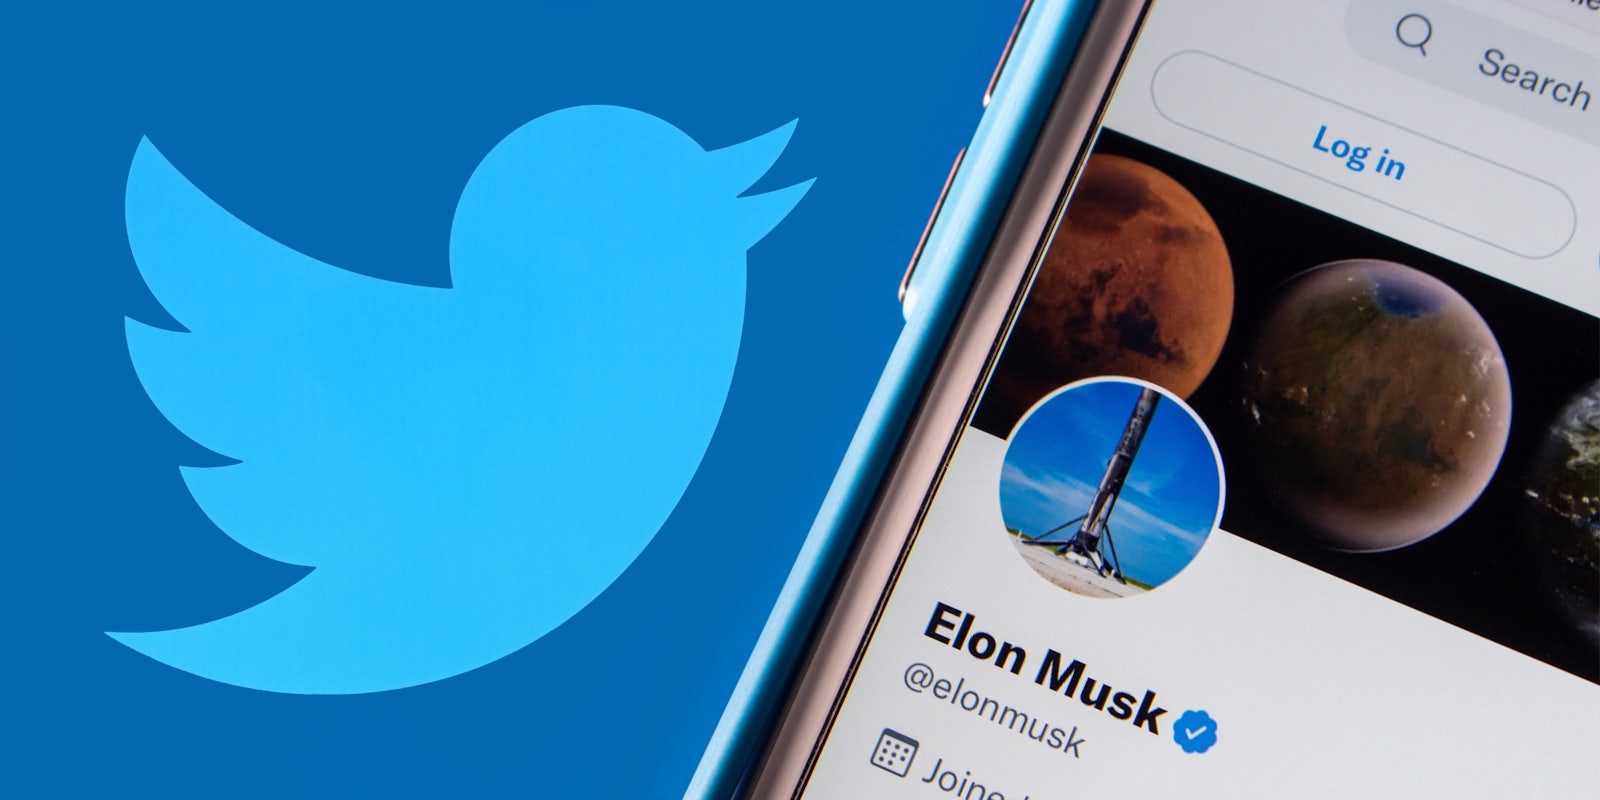 Elon Musk Twitter account on phone screen with Twitter logo on left